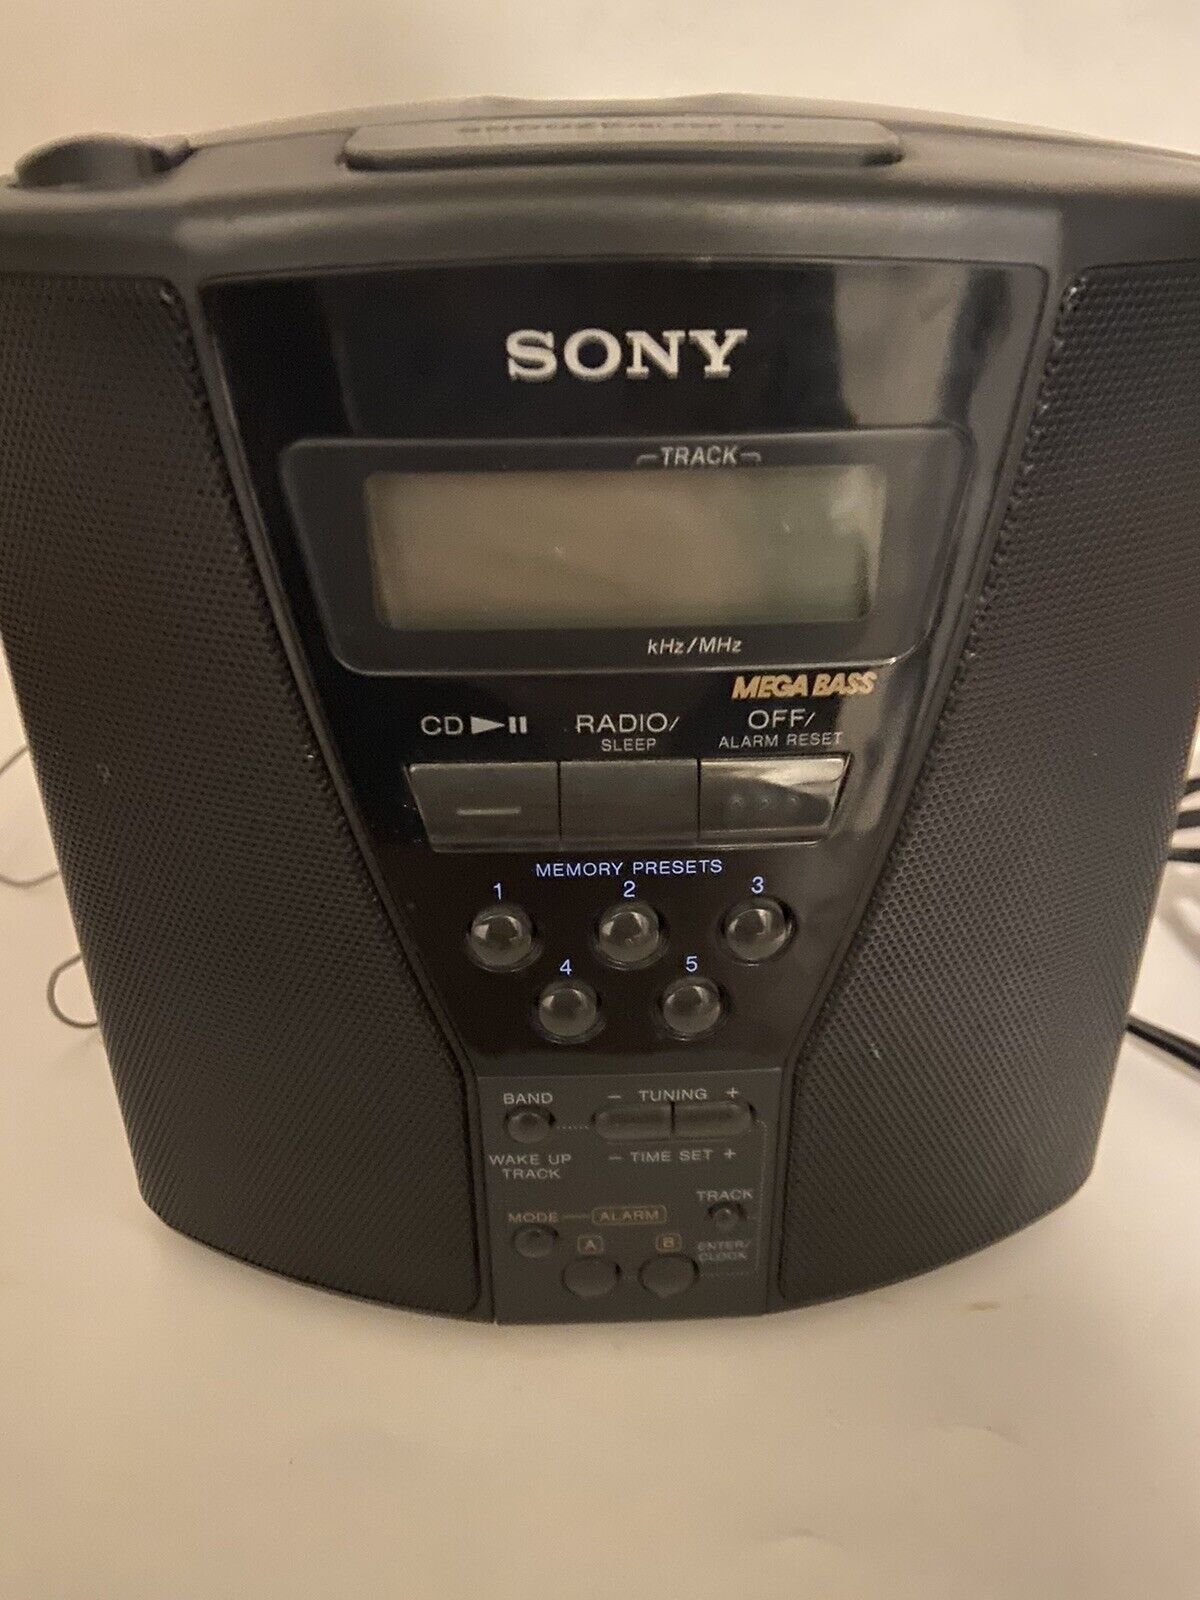 Sony ICF-CD833 CD Player Alarm Clock-AM/FM-Black-1995-Corded-Tested All Works